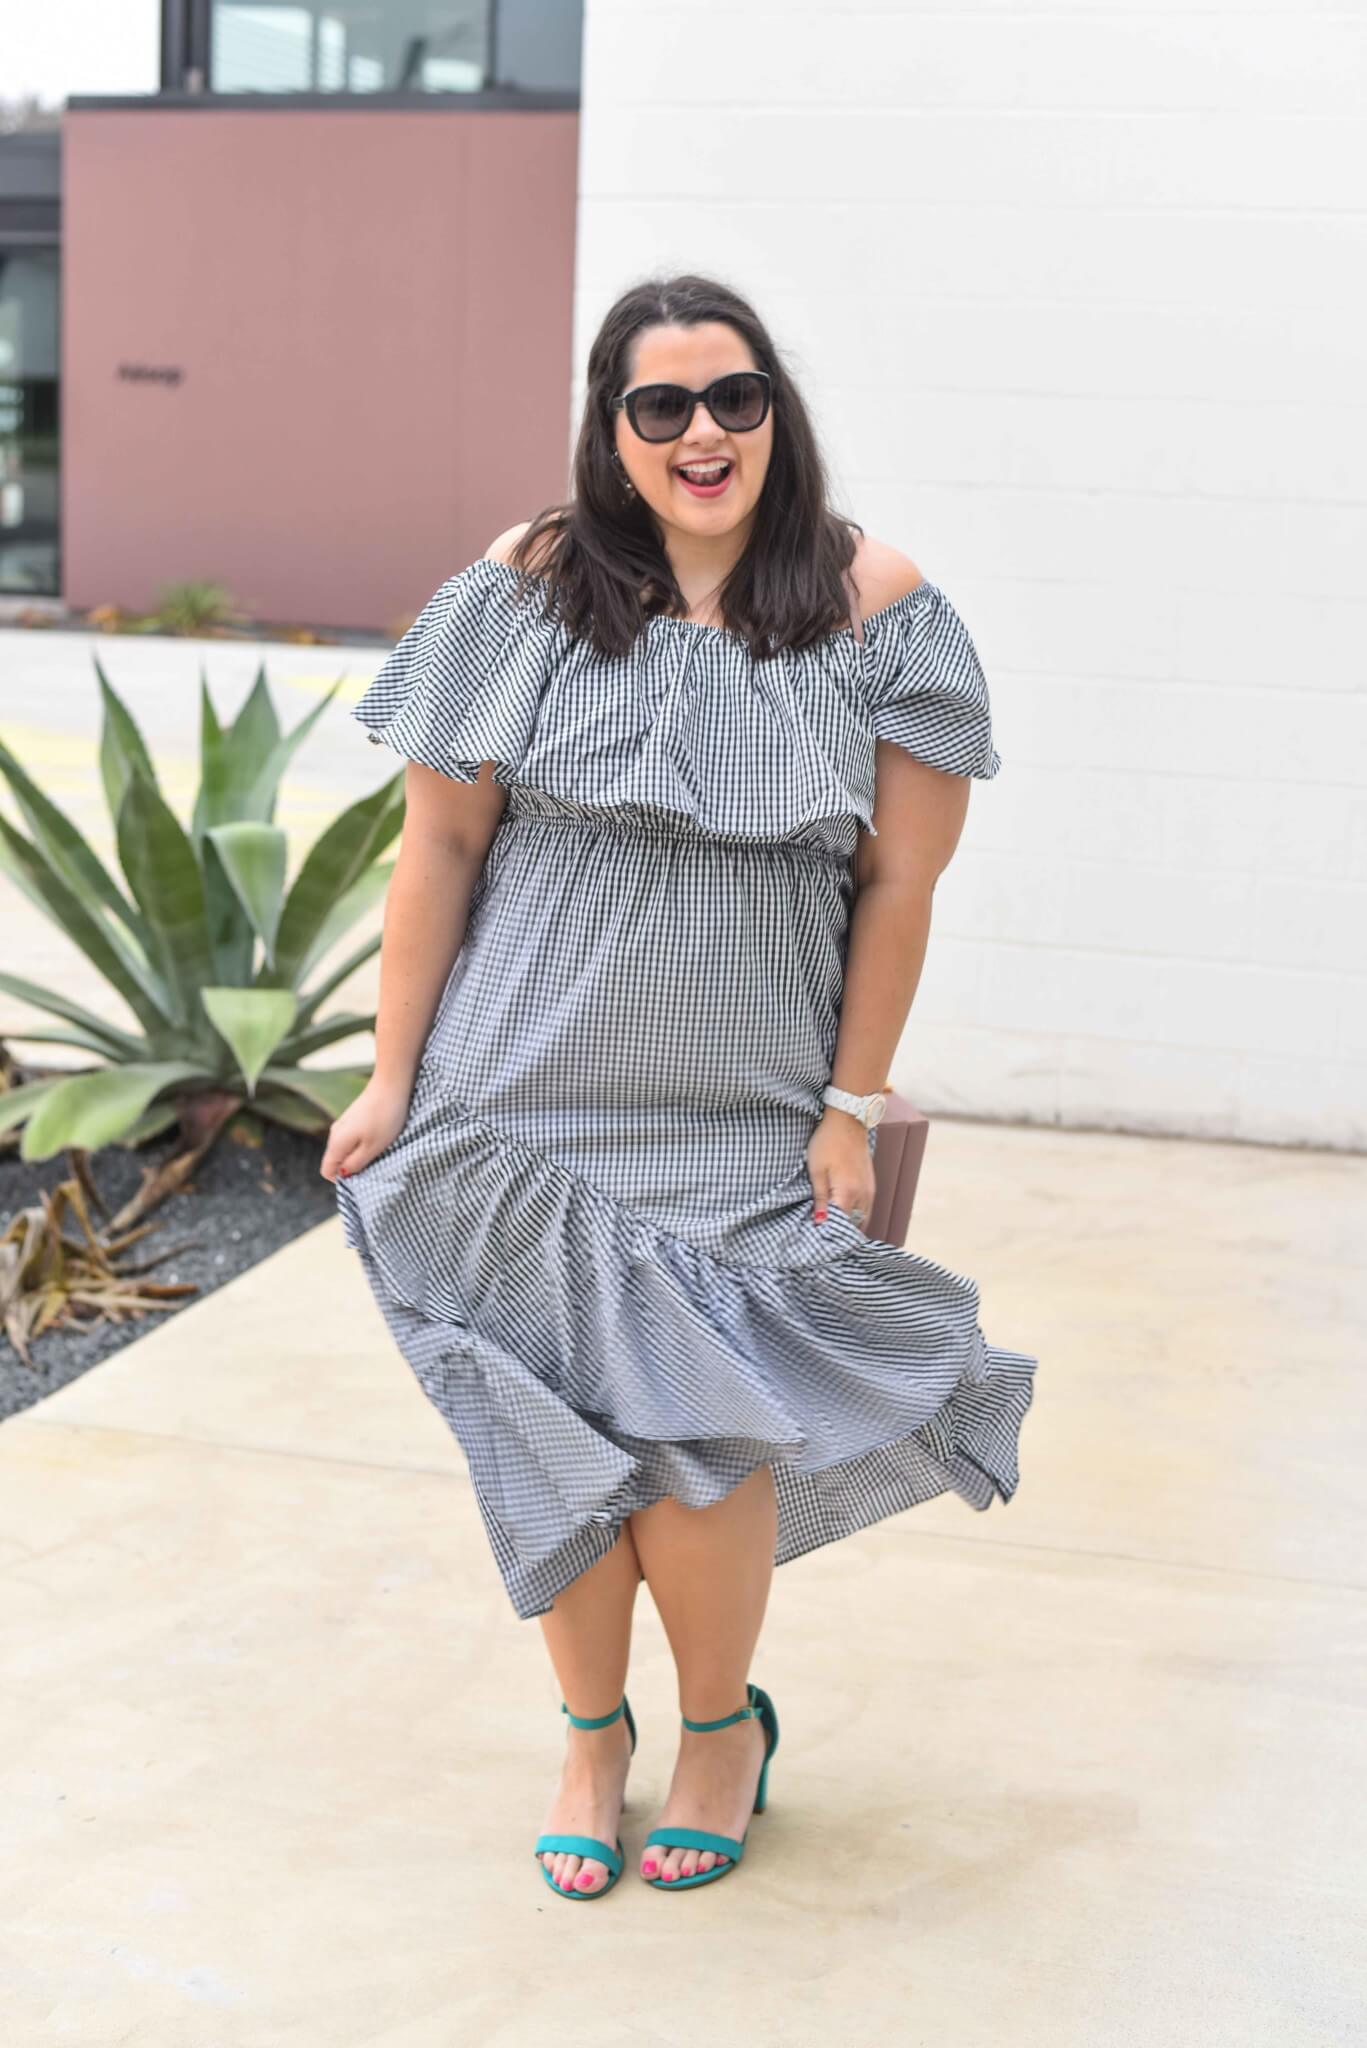 Give Me All the Gingham Clothing by popular Houston fashion blogger Something Gold, Something Blue